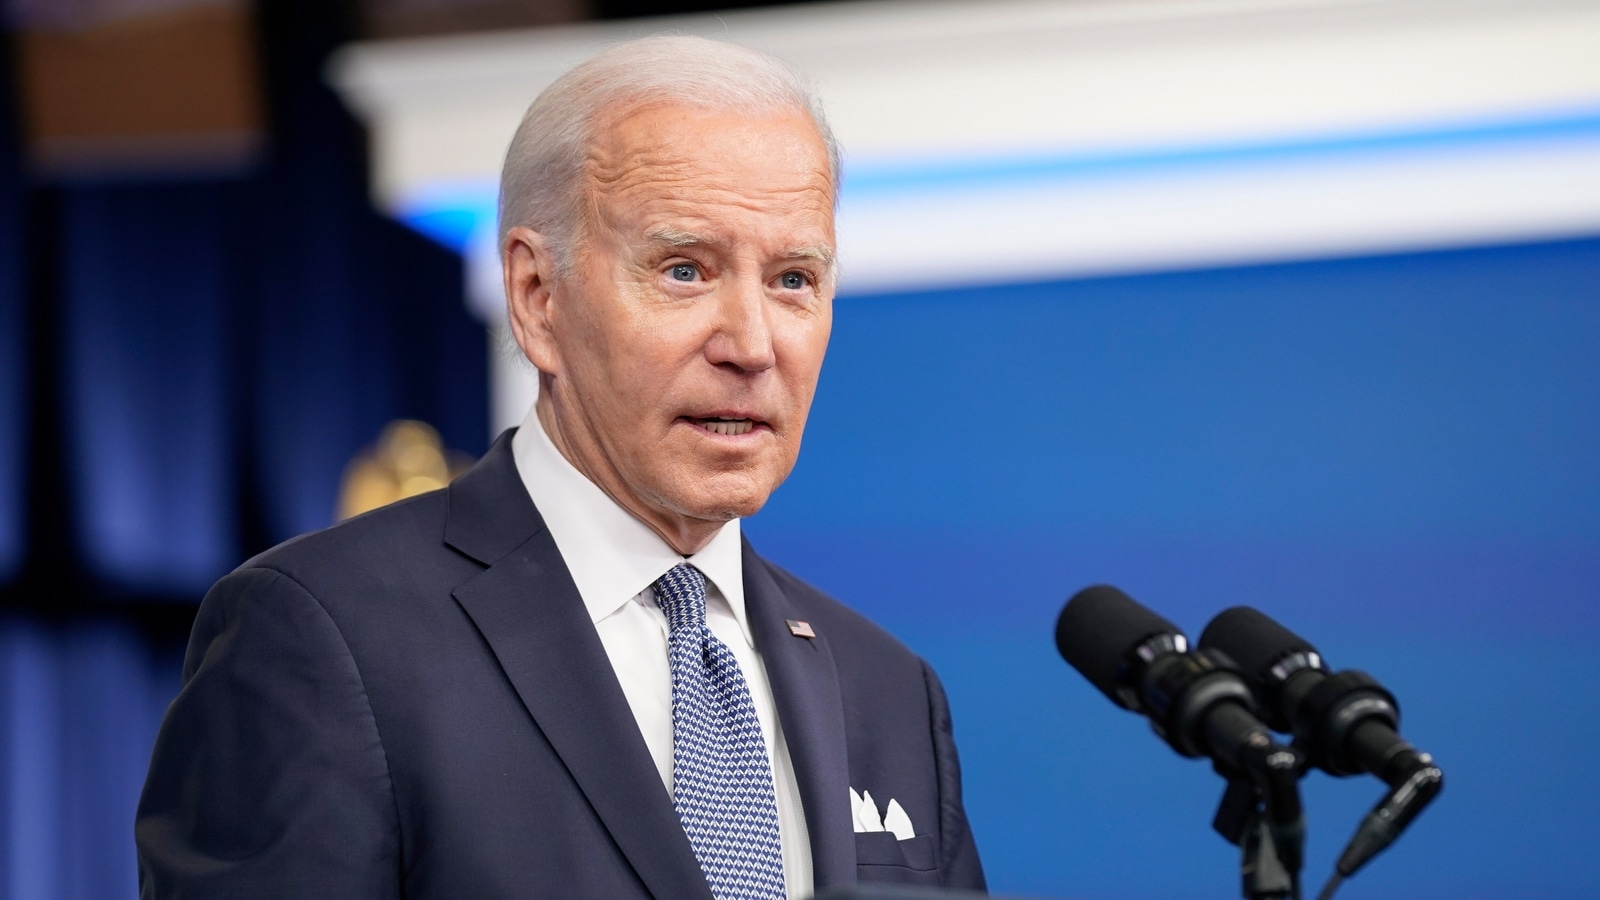 'The fight for abortion rights isn't over': US President Joe Biden